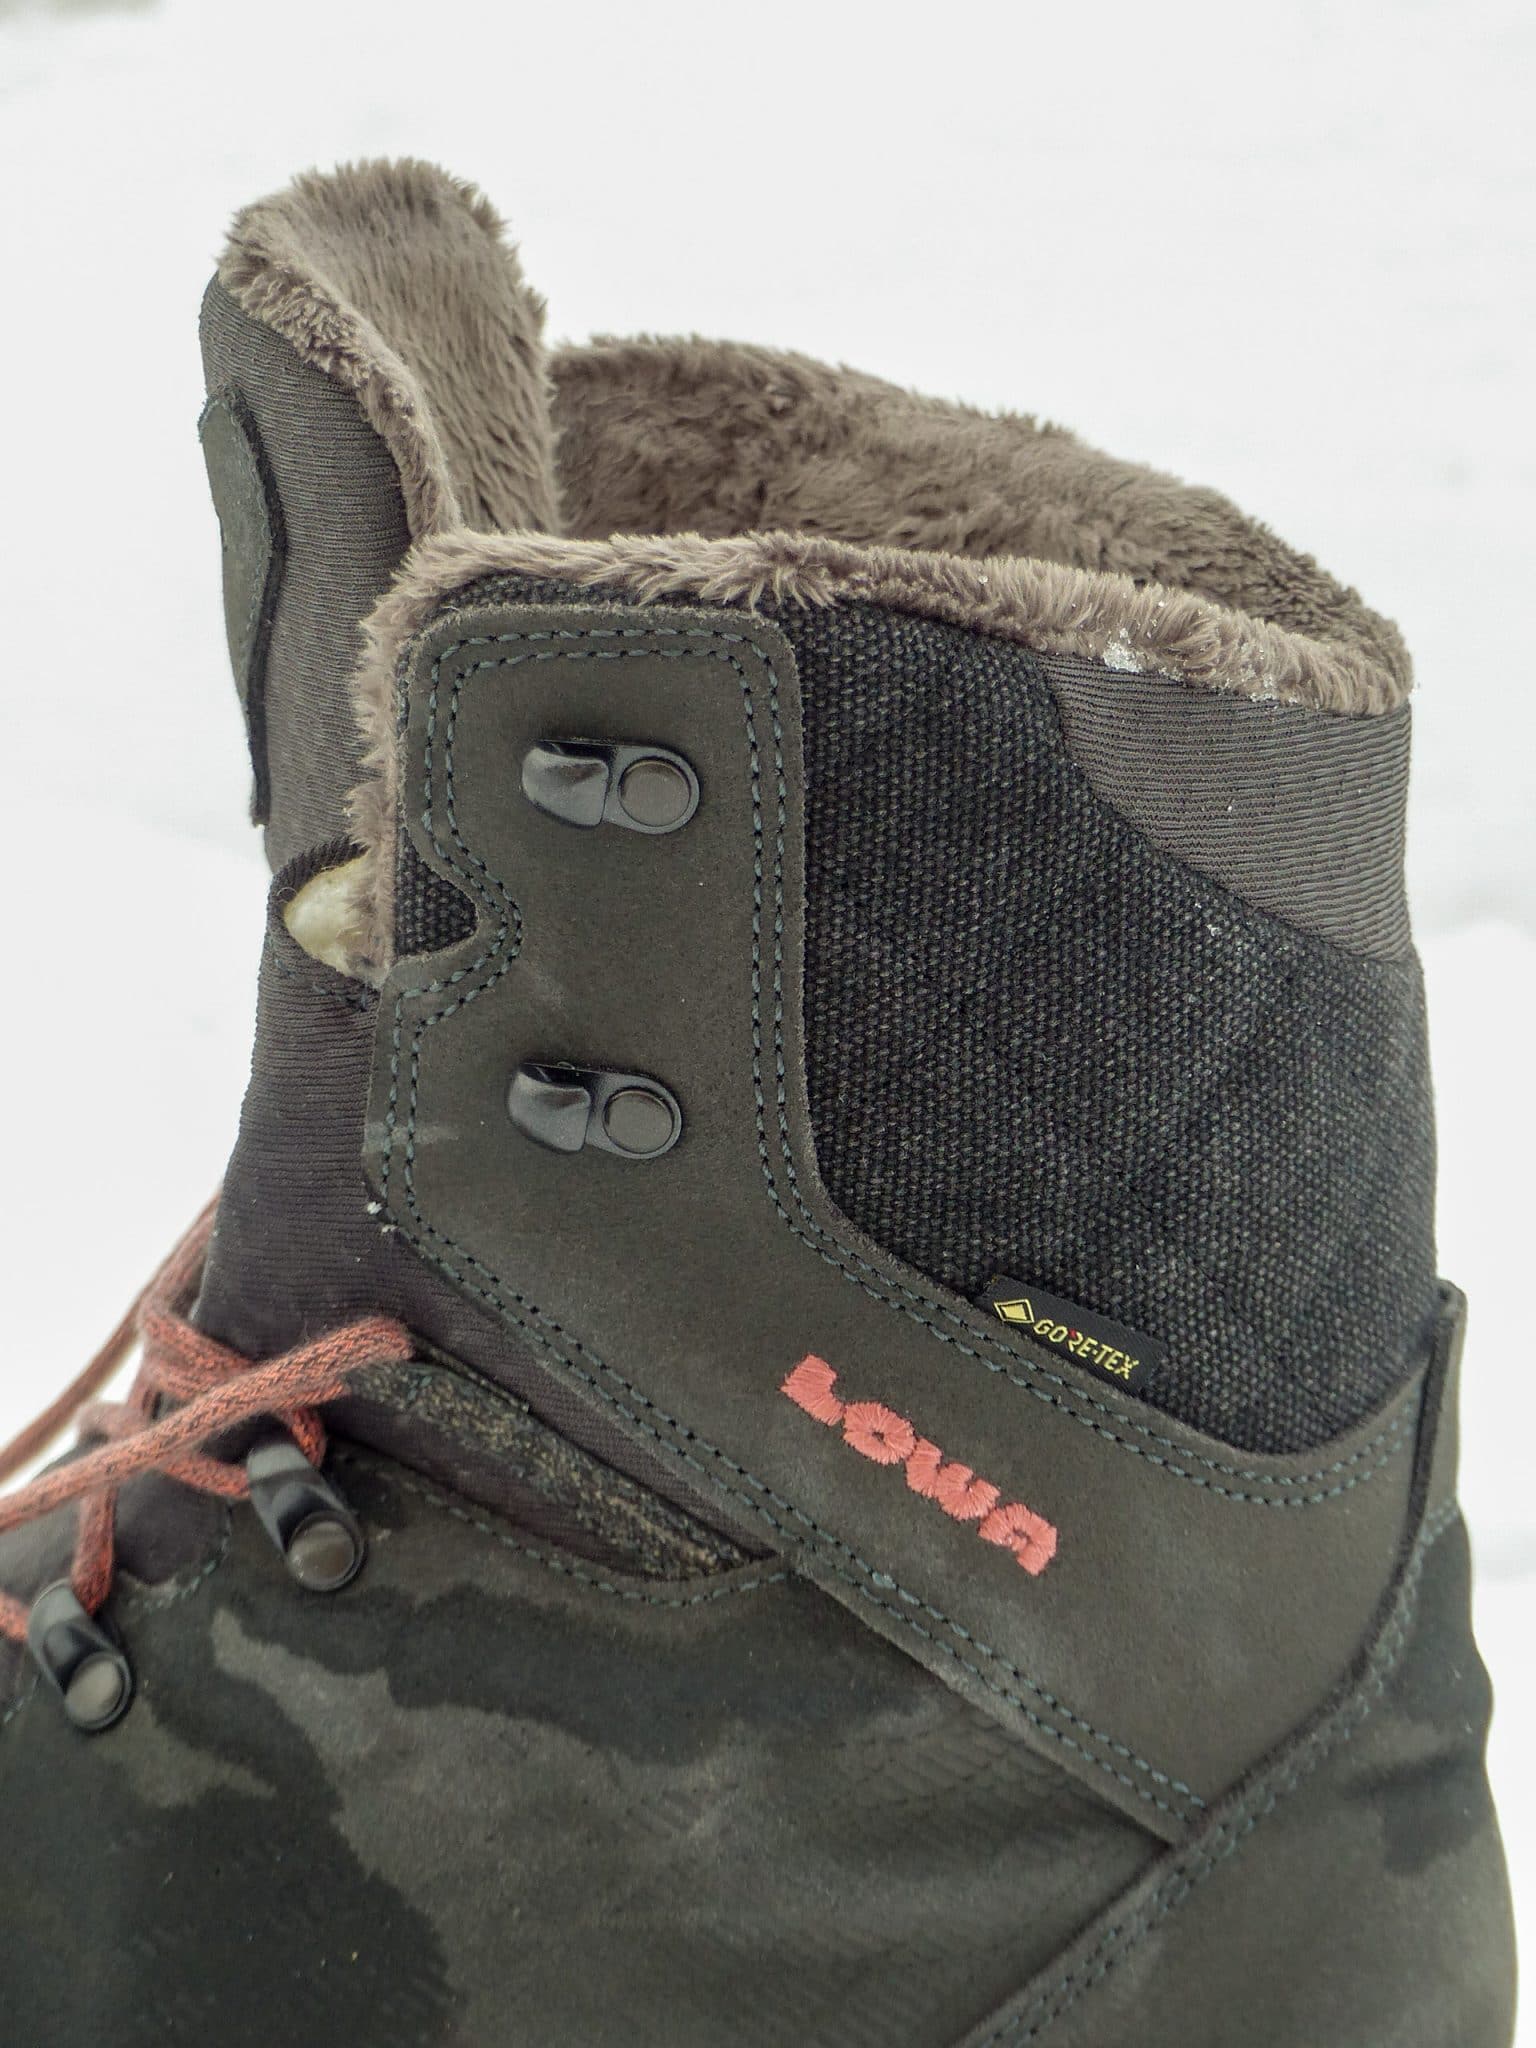 Crimineel Albany Stout Test des chaussures hivernales Lowa Nabucco Evo GTX Ws